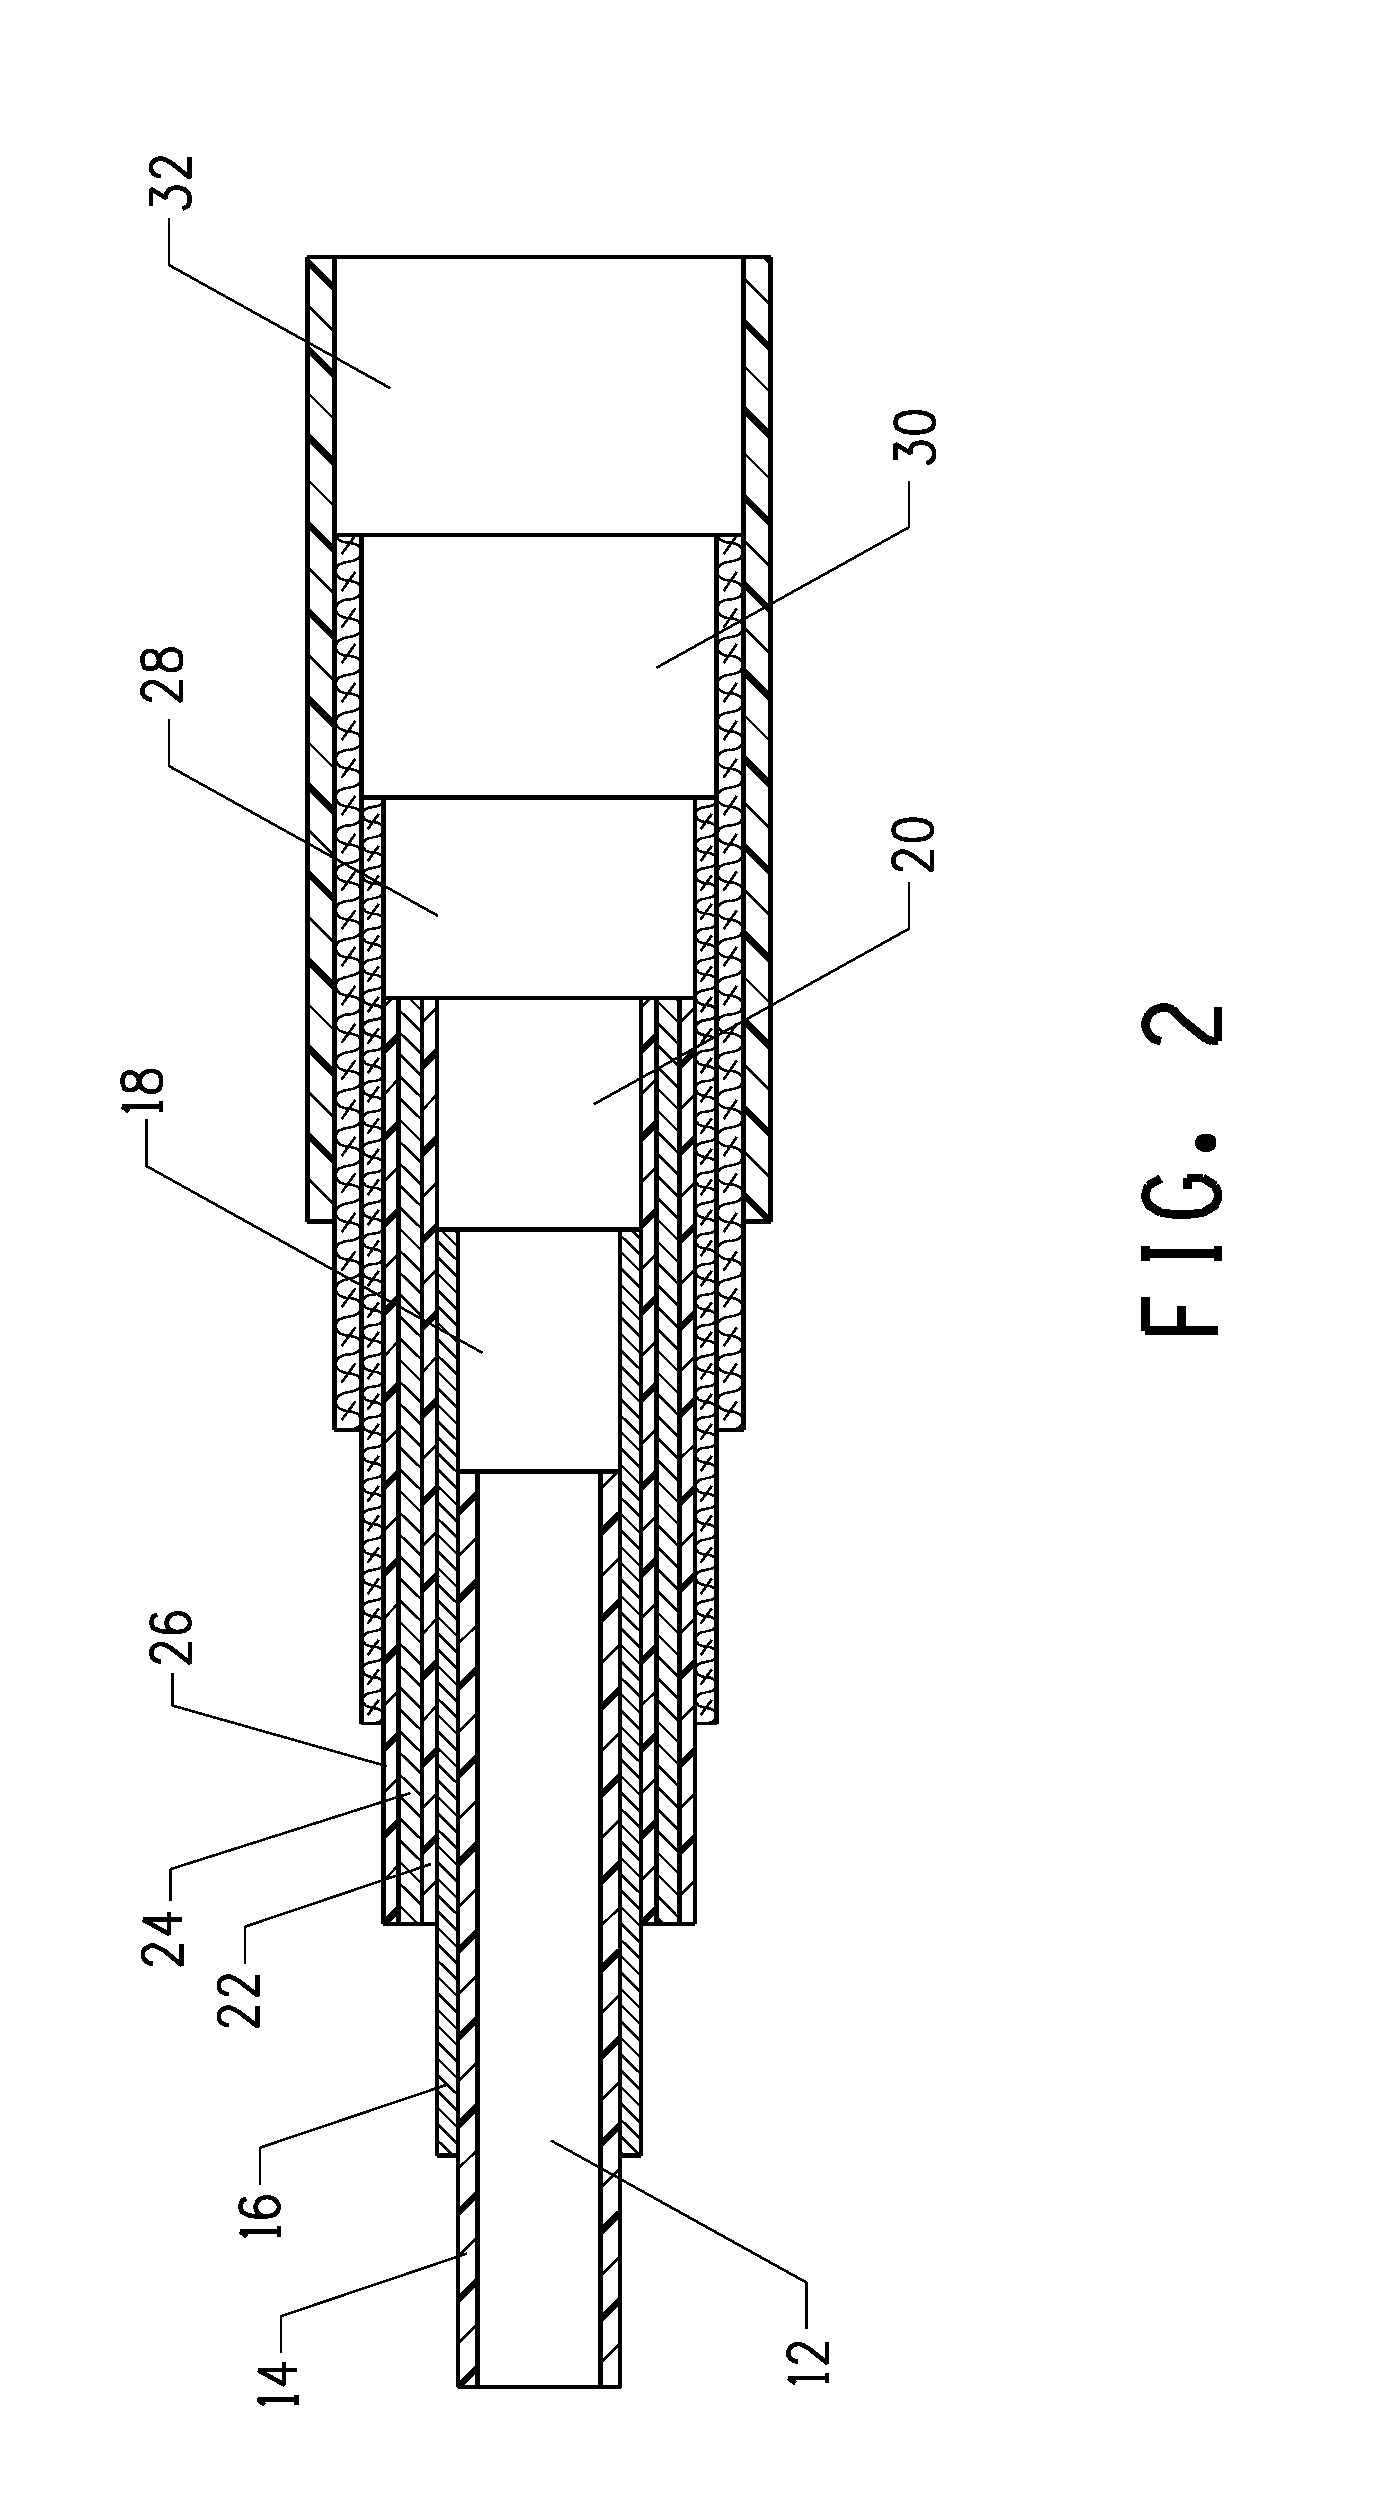 Method for circulating selected heat transfer fluids through a closed loop cycle